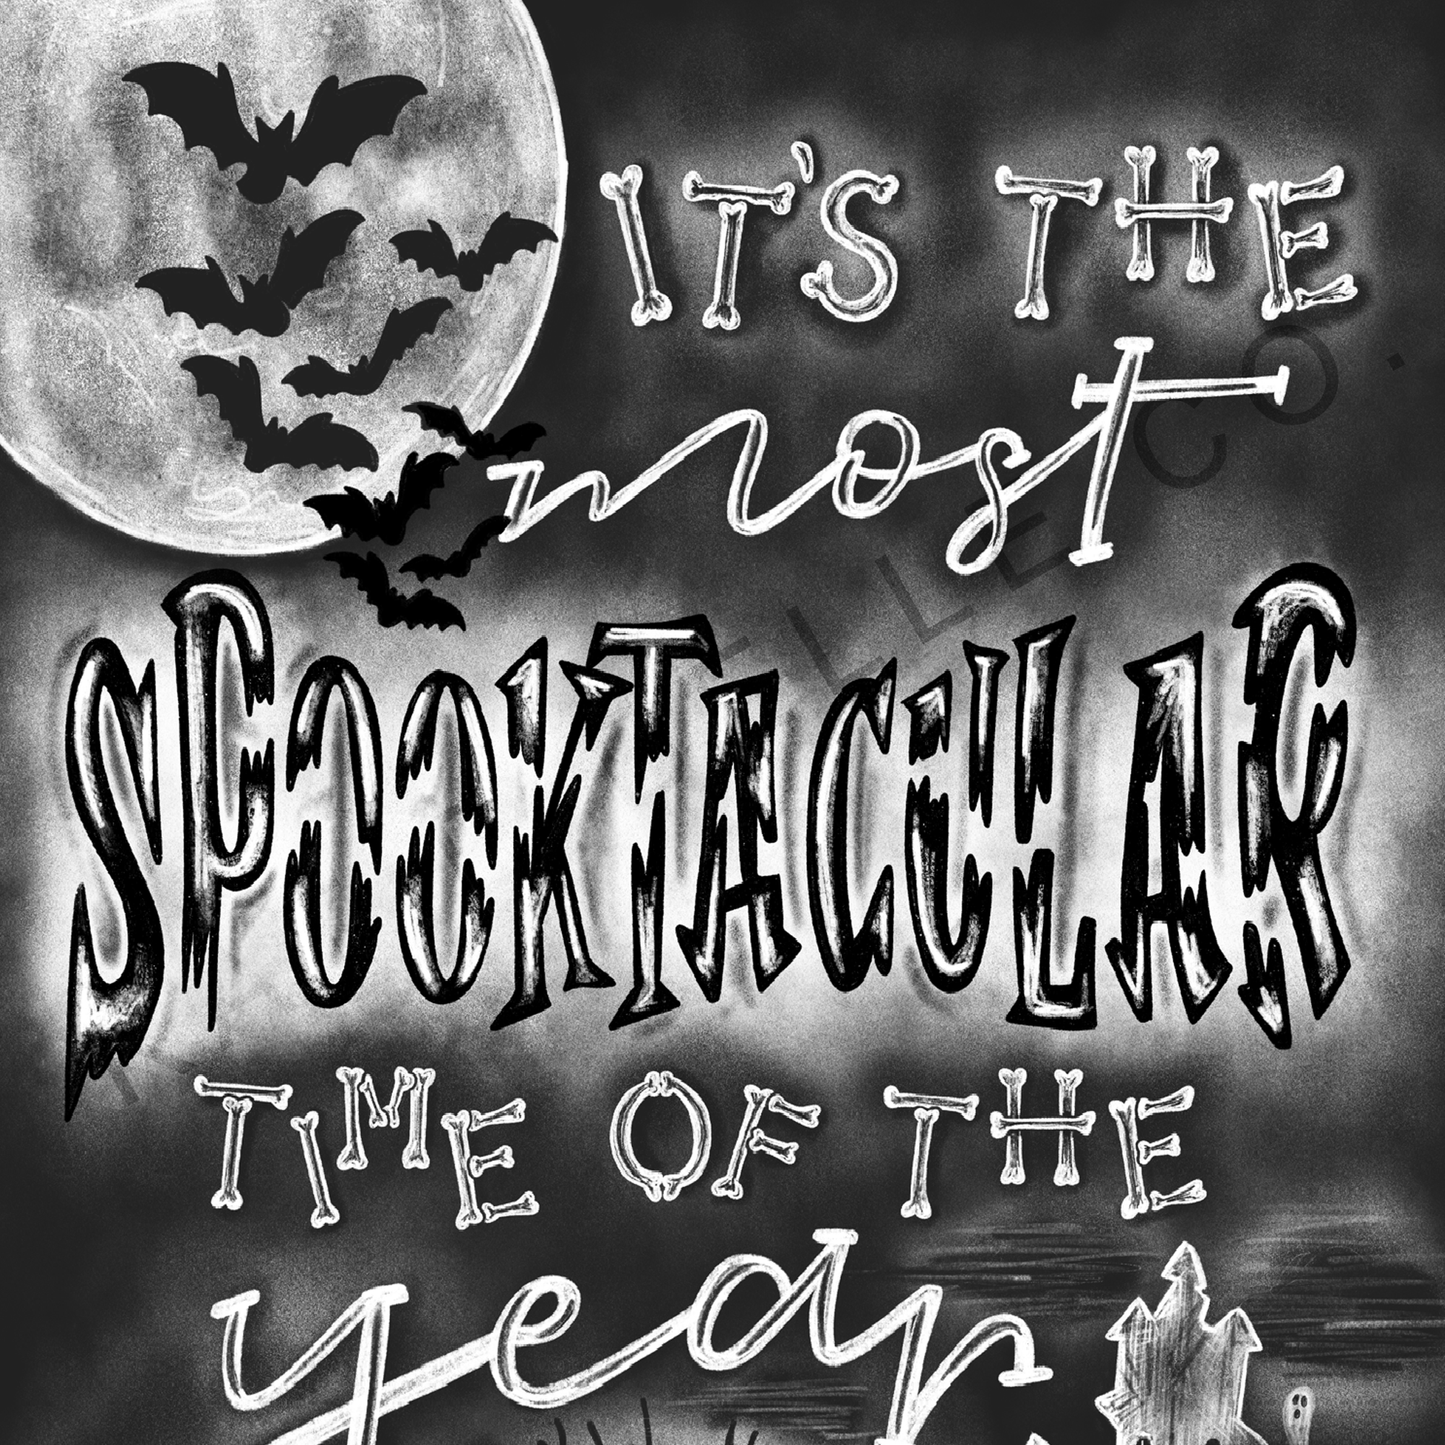 Dare yourself to step into the spooky season with this Spooktacular Halloween Chalkboard Print. Get inspired with haunted houses, bats, graveyards and a full moon - it's the perfect way to bring a unique touch of Halloween flair to your home! Bats. full moon. haunted house. graveyard. chalk art. katie belle co. 